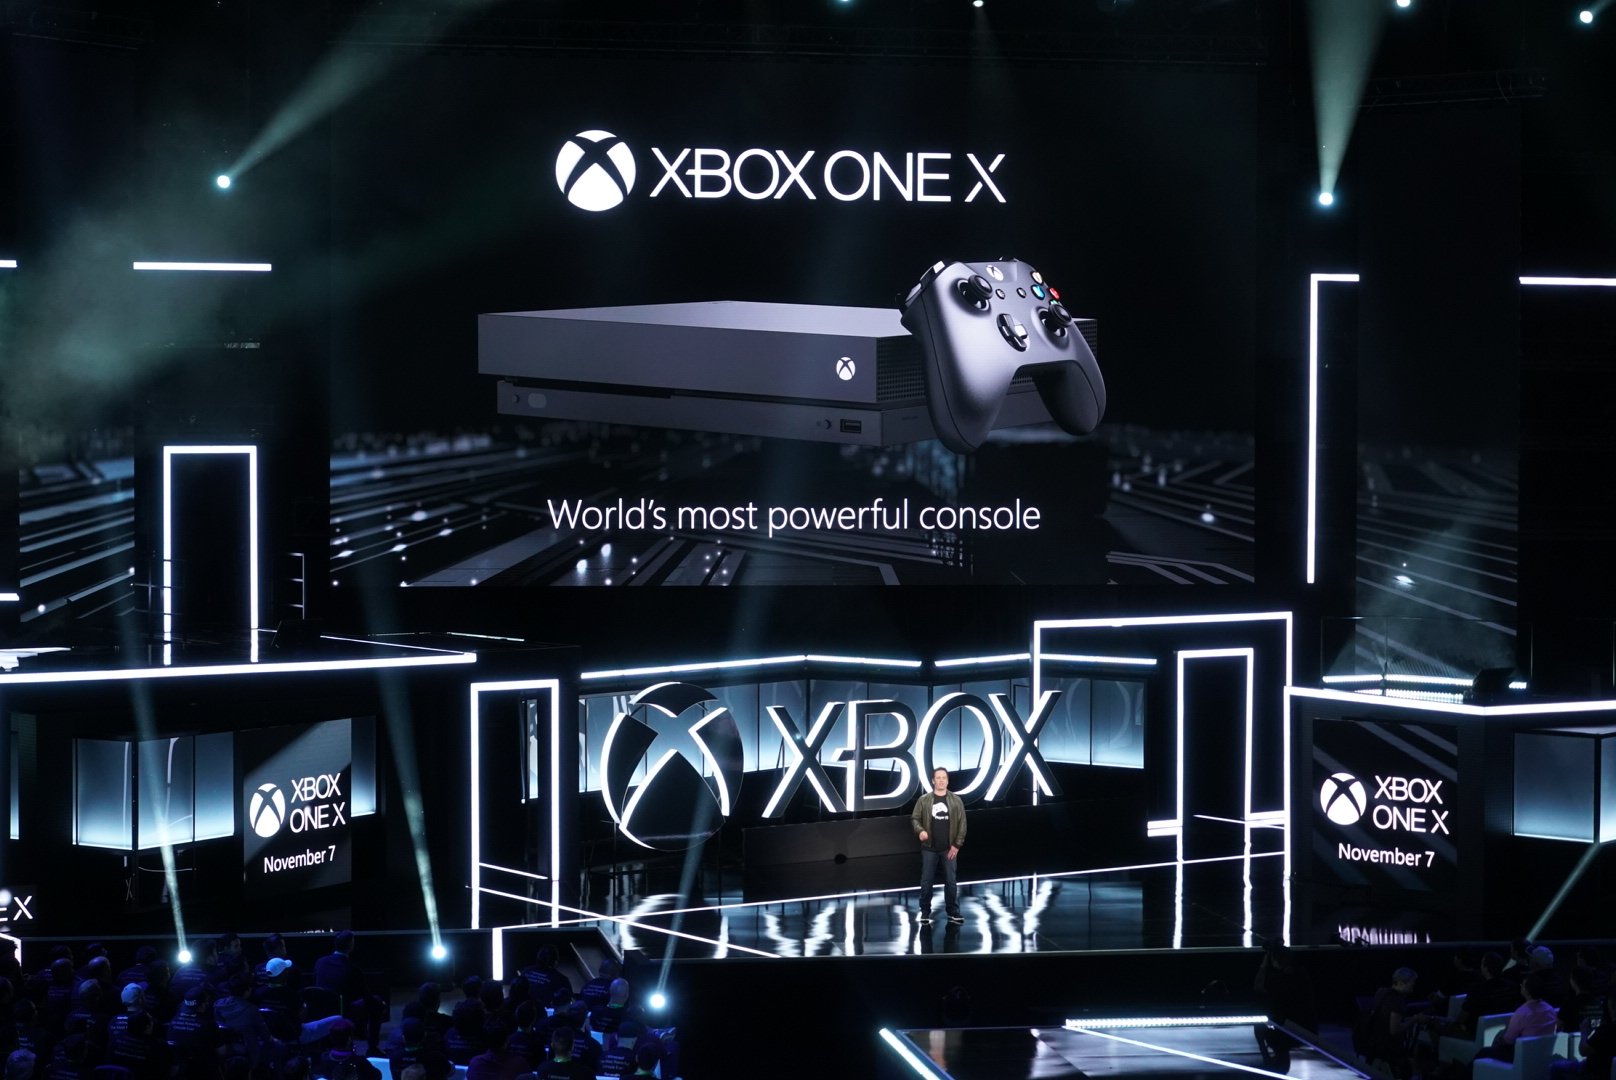 Microsoft announces 22 console exclusives are coming to the Xbox One paltform